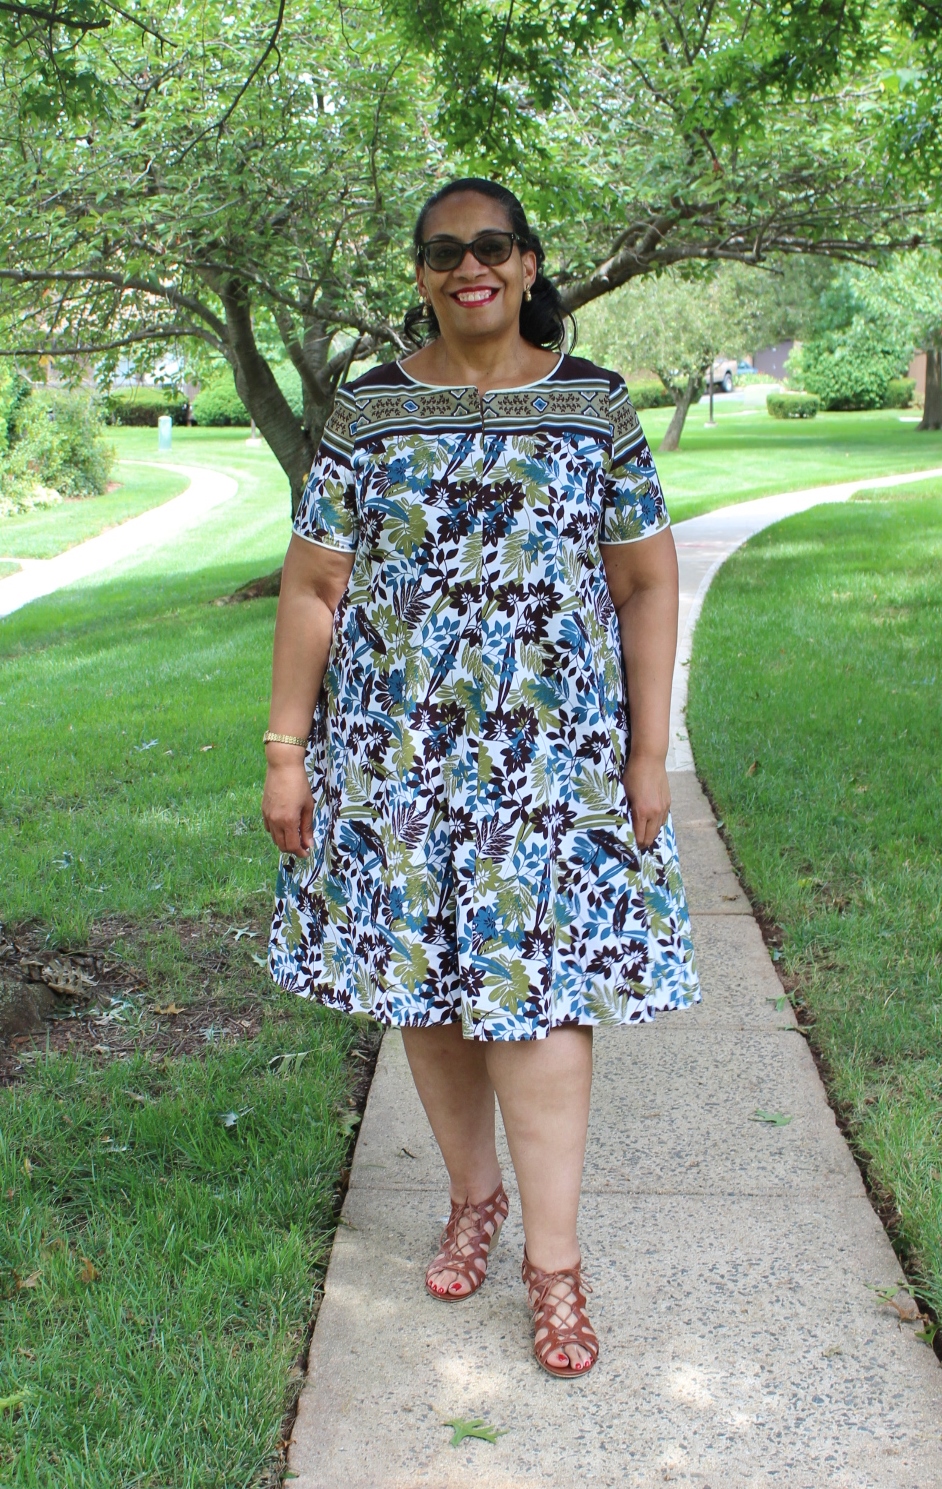 Diary of a Sewing Fanatic: New Look 6340 in a Border Print